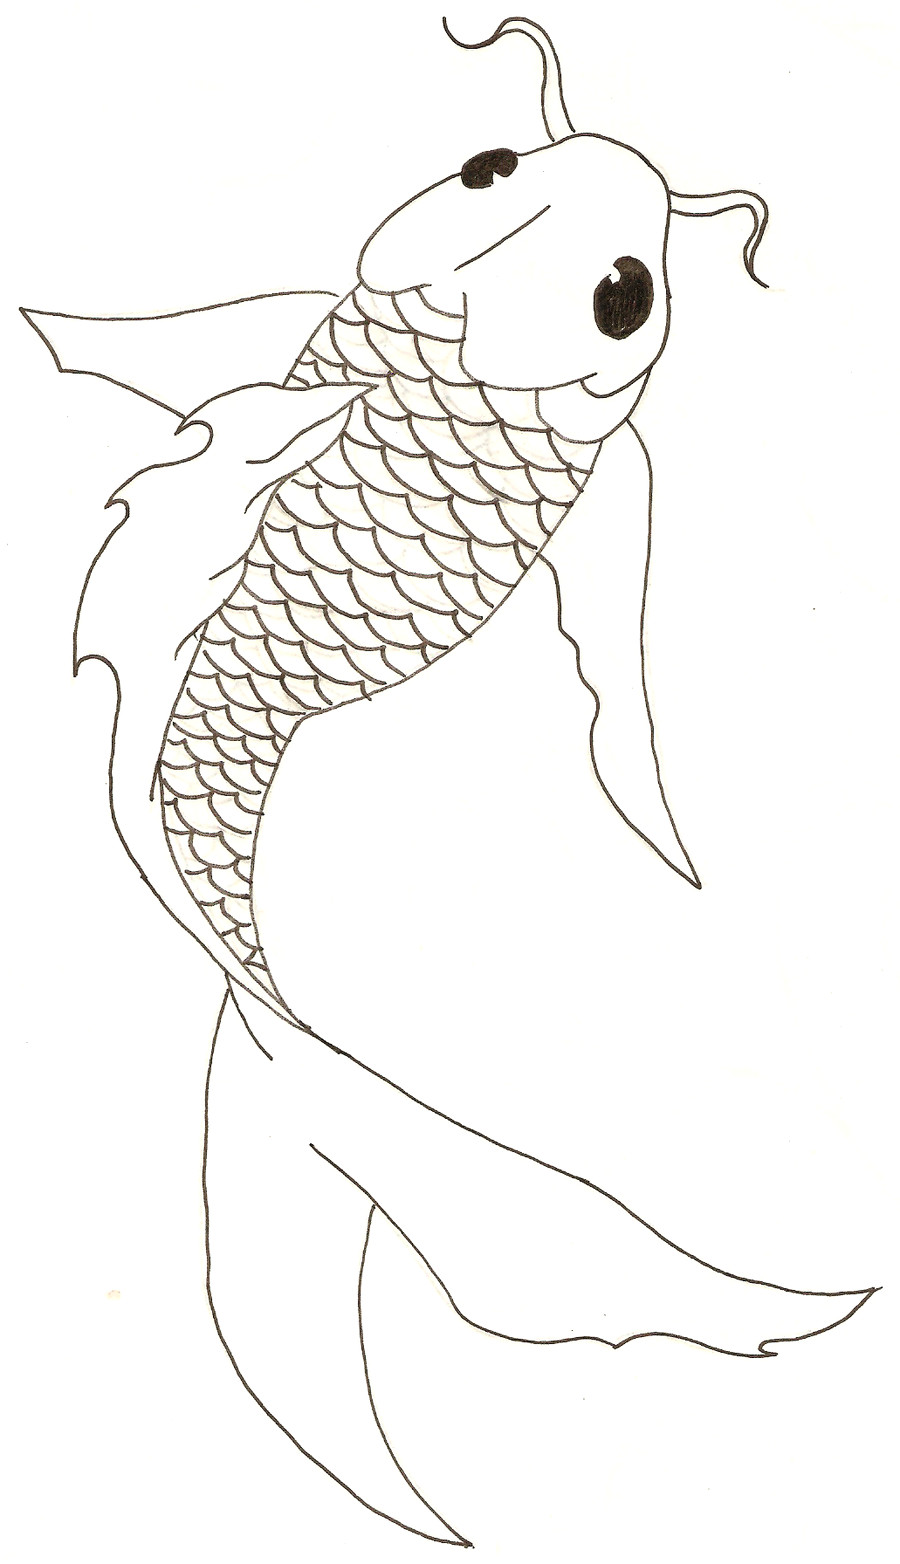 Easy Way to Draw A Fish Nice Fish Drawing Could Be Adapted for Stained Glass Koi